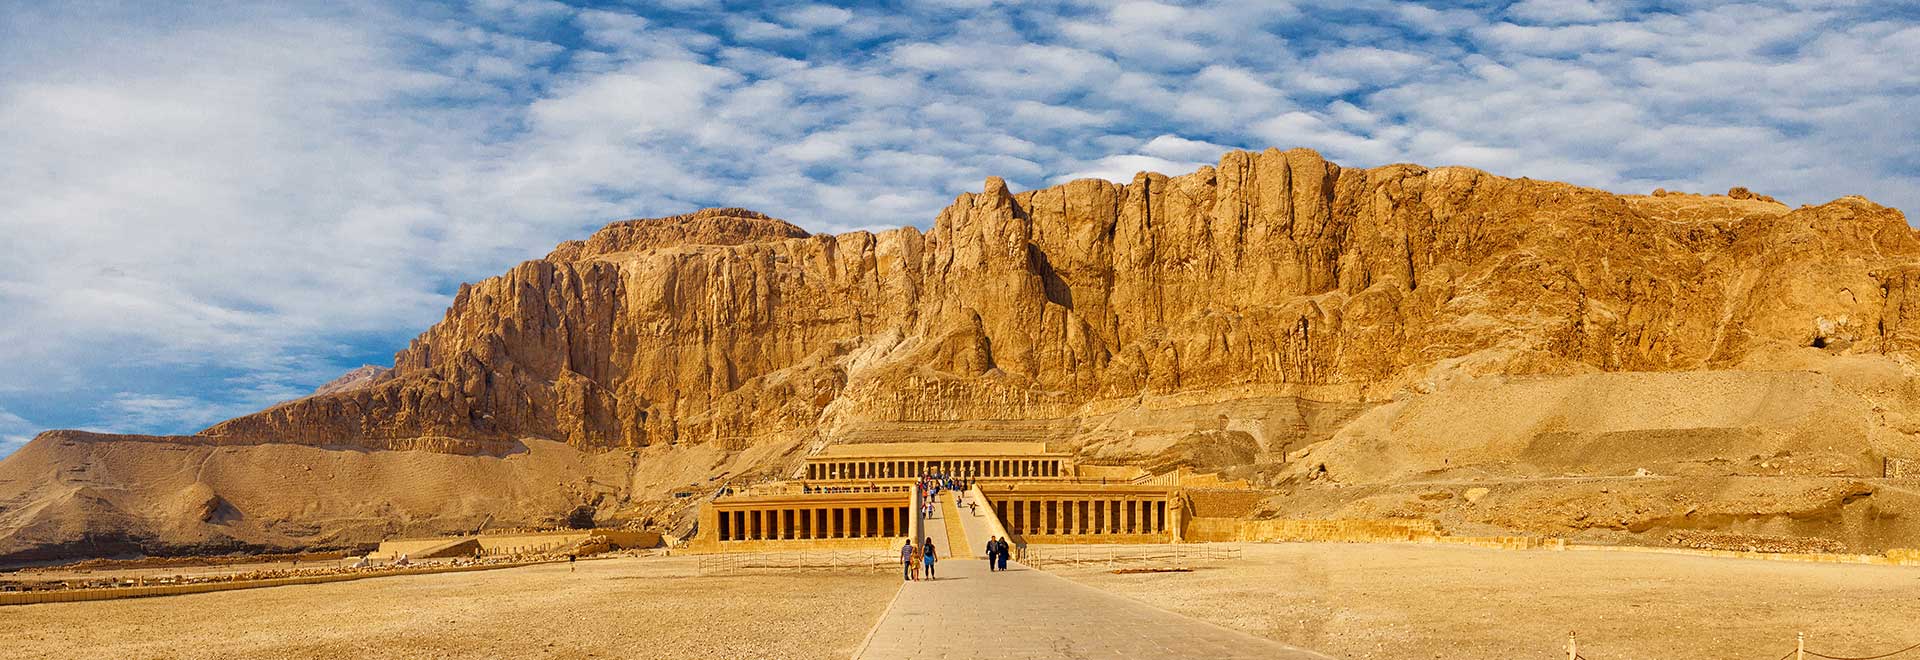 Middle East Egypt Temple Queen Hatshepsut MH